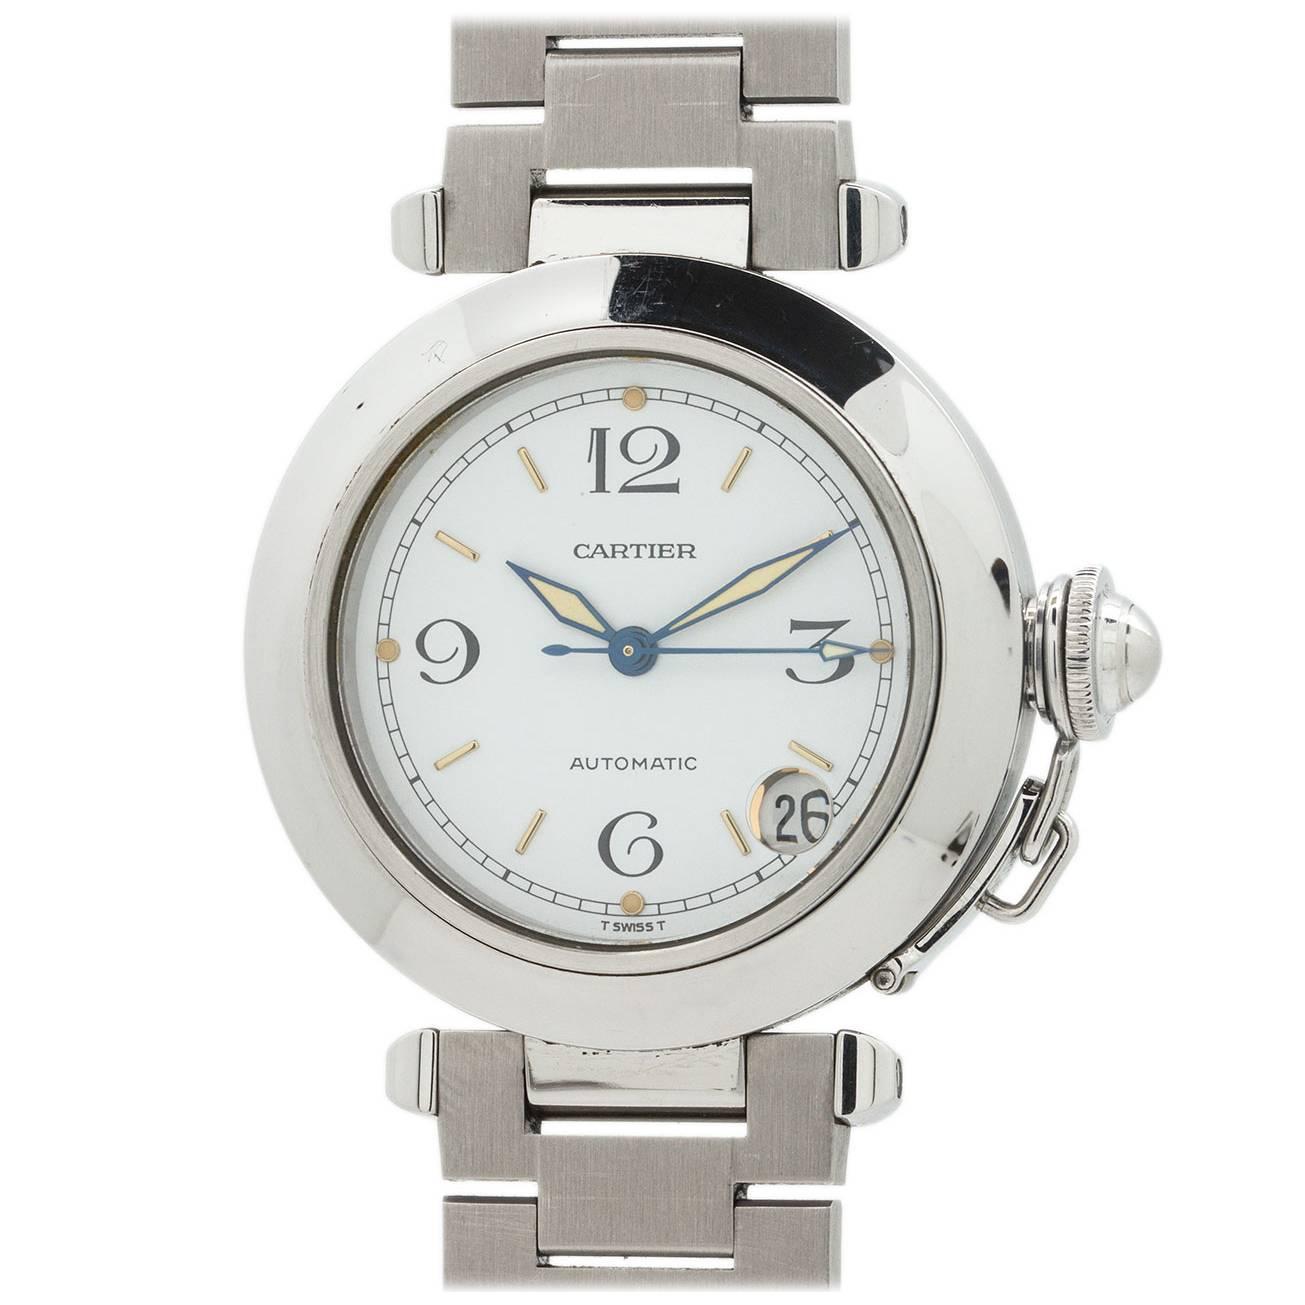 Cartier Stainless Steel White Dial Pasha Automatic Wristwatch 